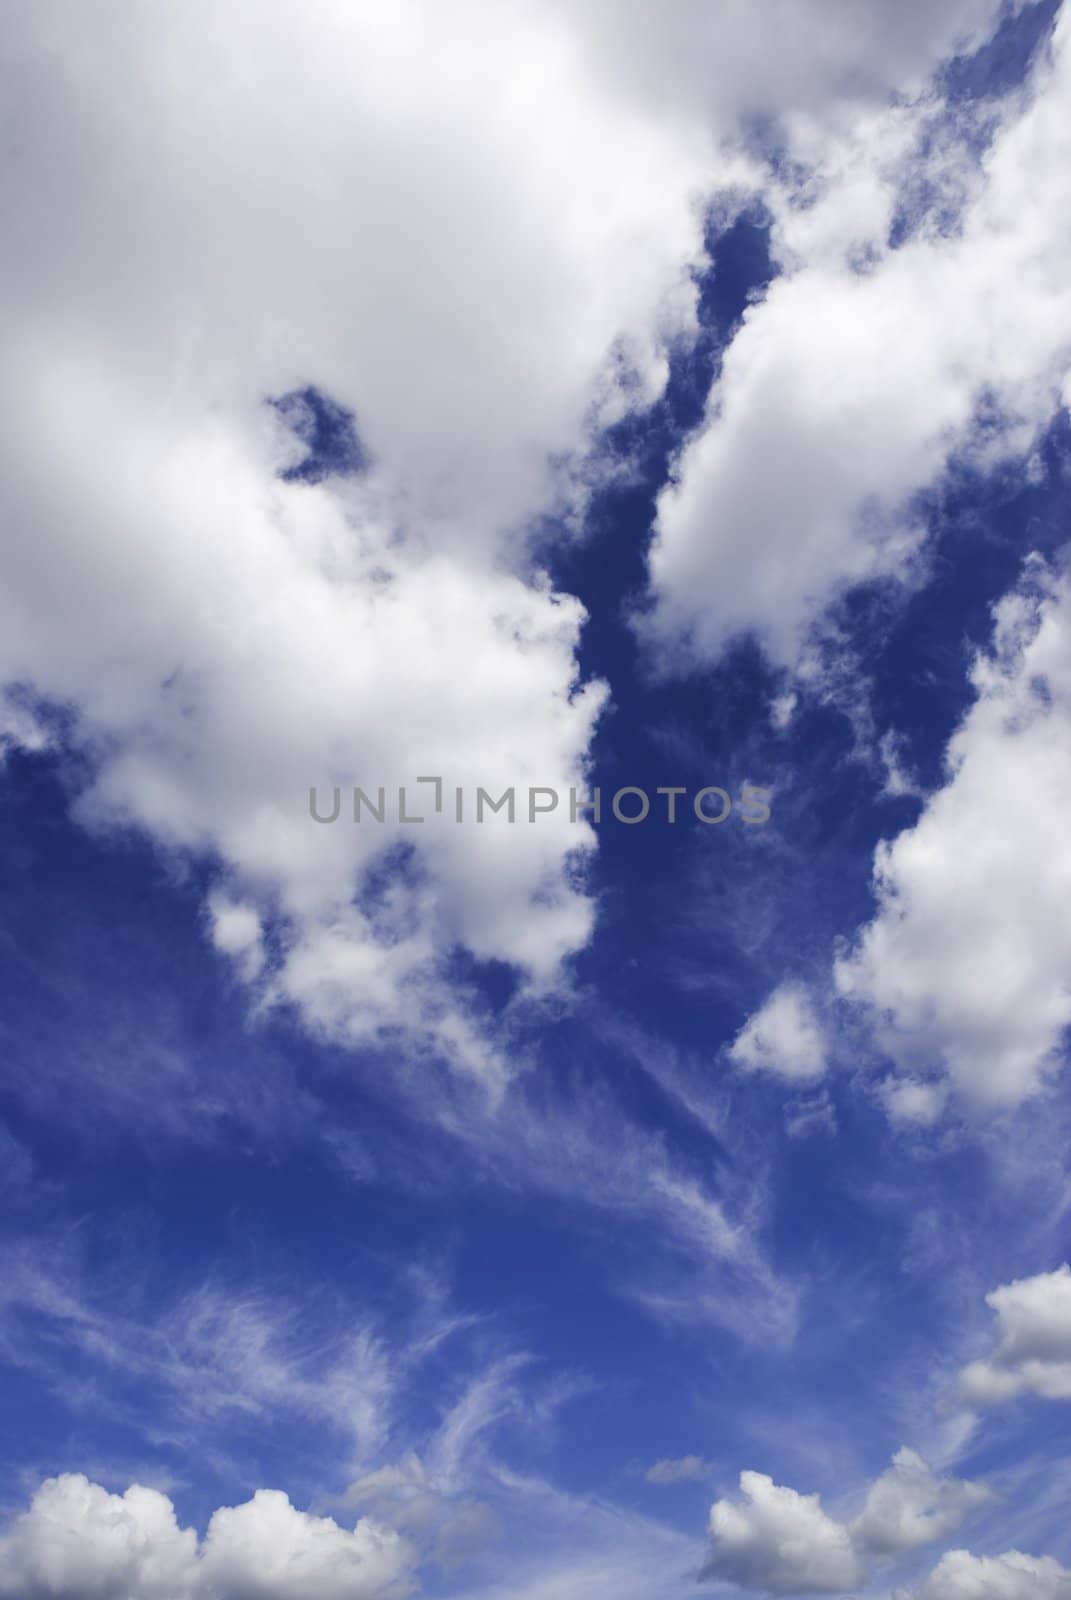 summer clouds in windy day,special photo f/x, focus point on the center